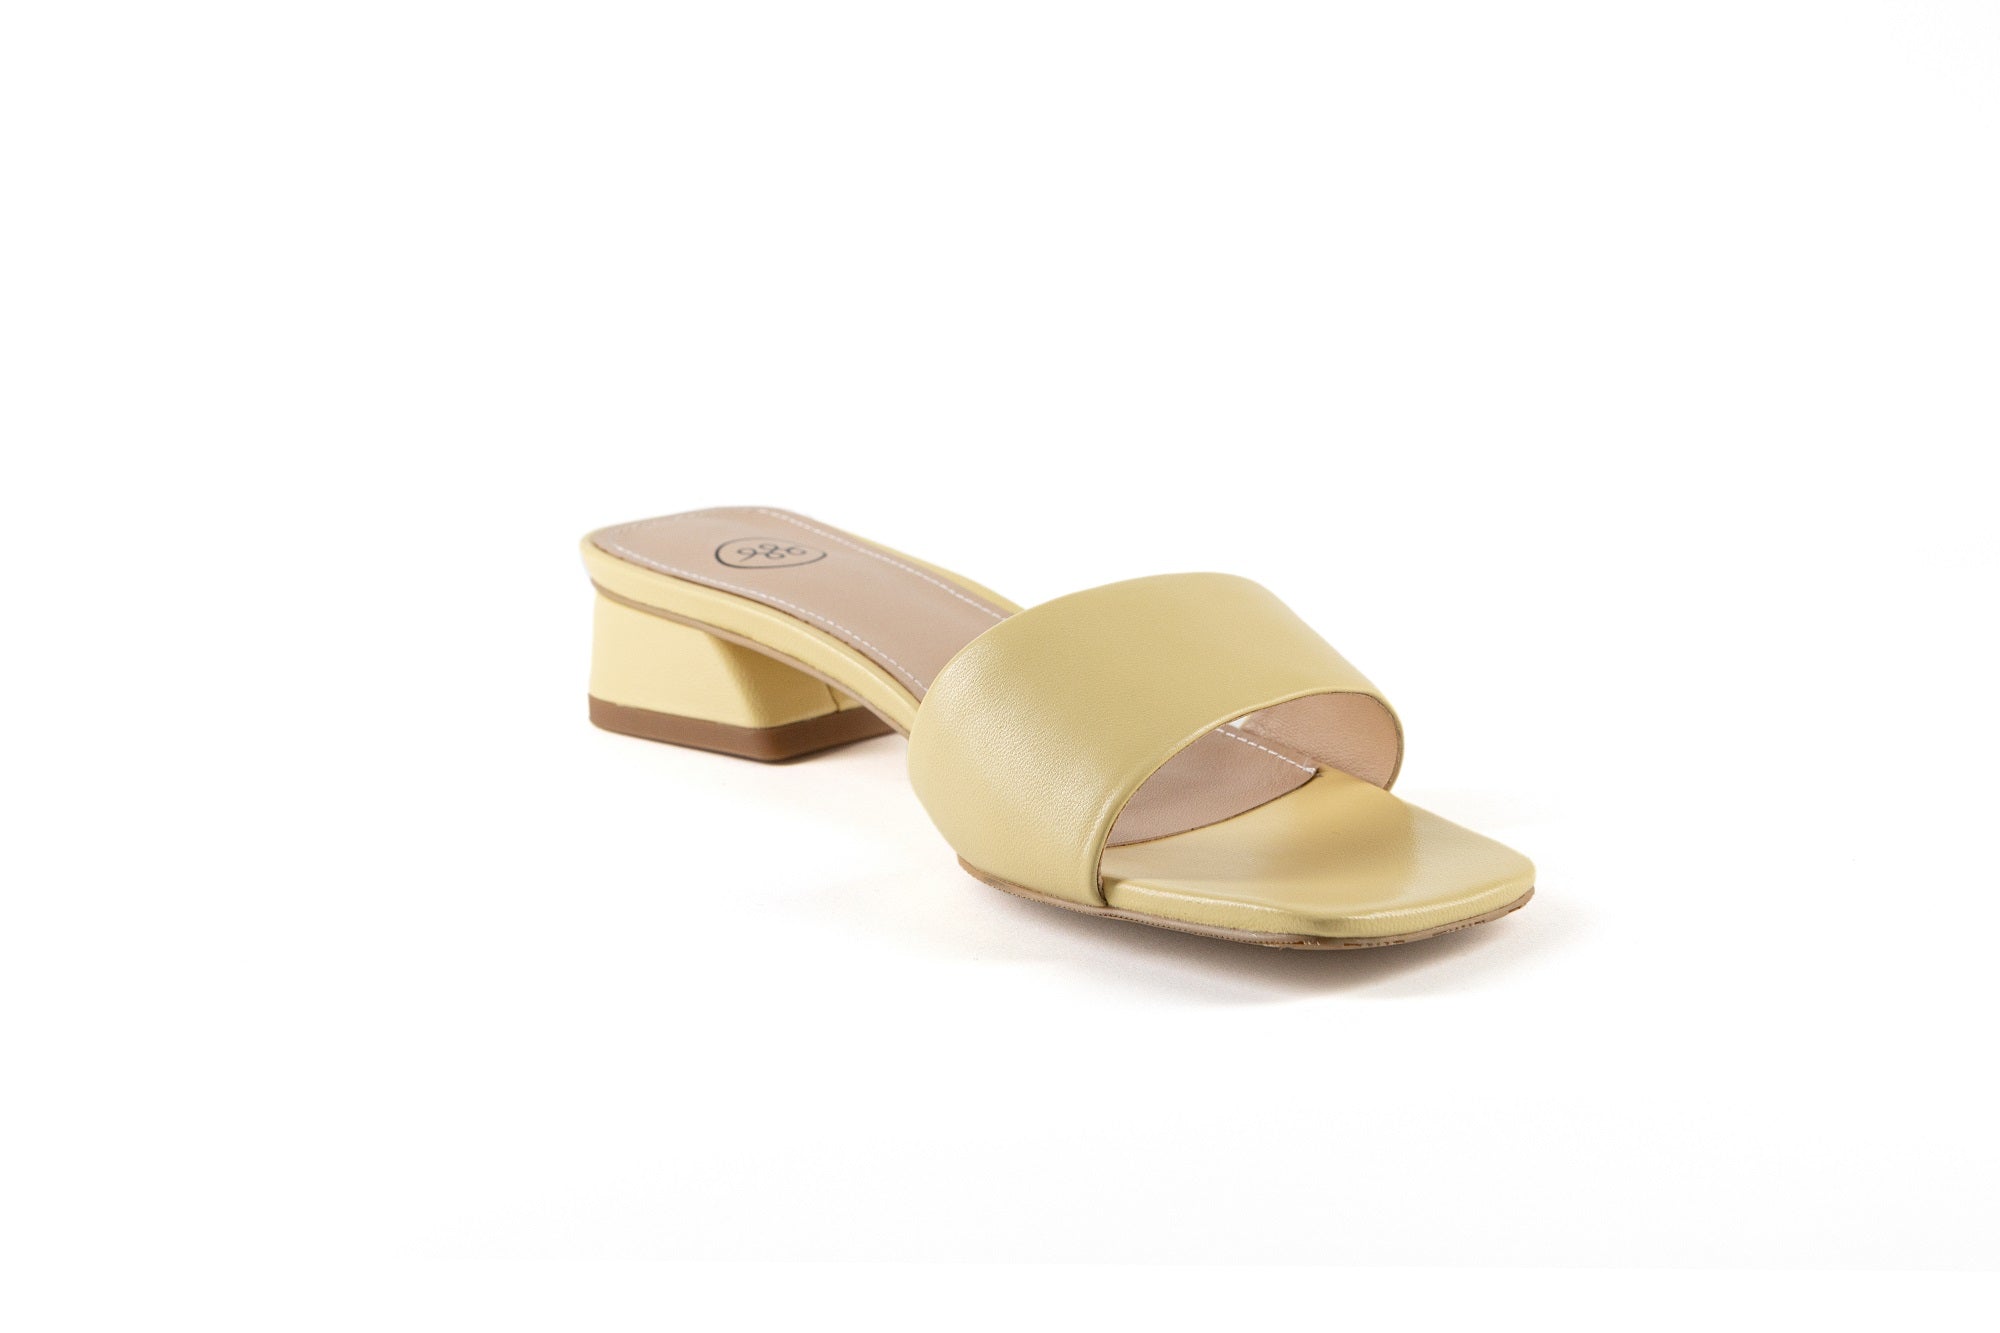 Marbella Sandal Buttermilk SAMPLE by Sole Shoes NZ F18-38 SAMPLE